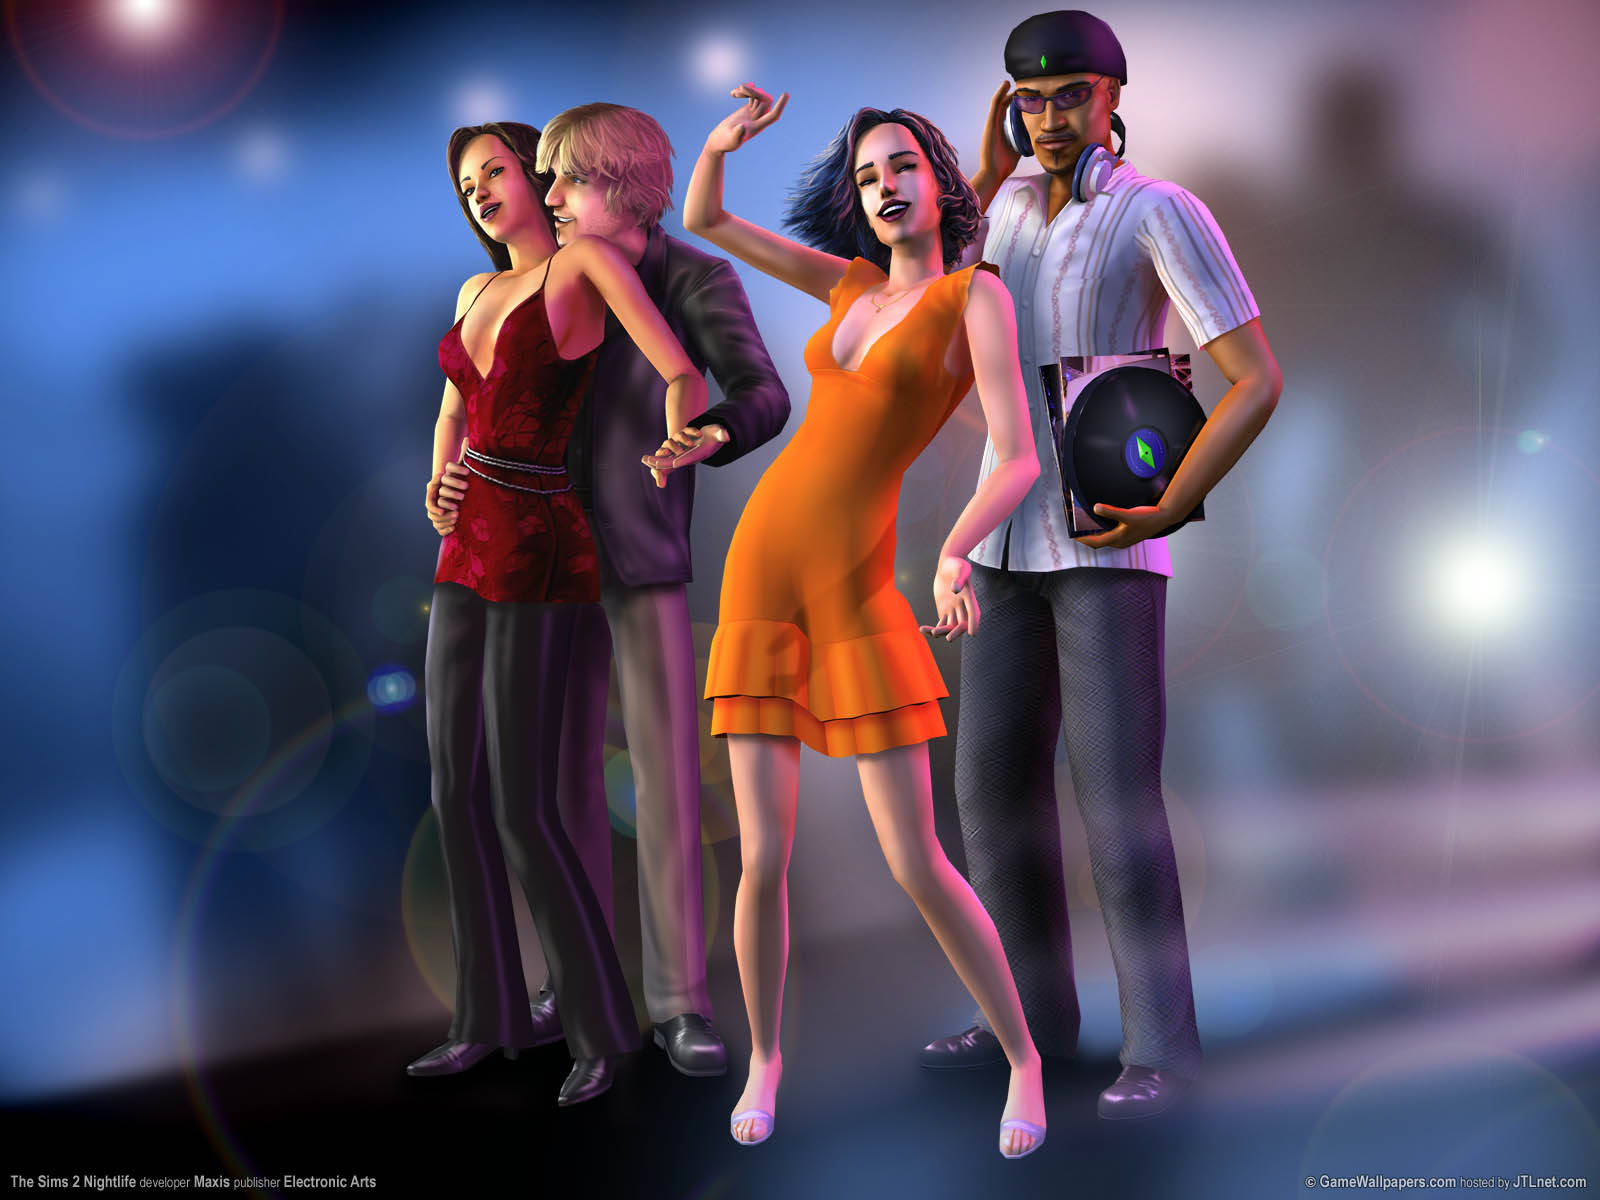 The Sims 2 Nightlife wallpaper 05 1600x1200